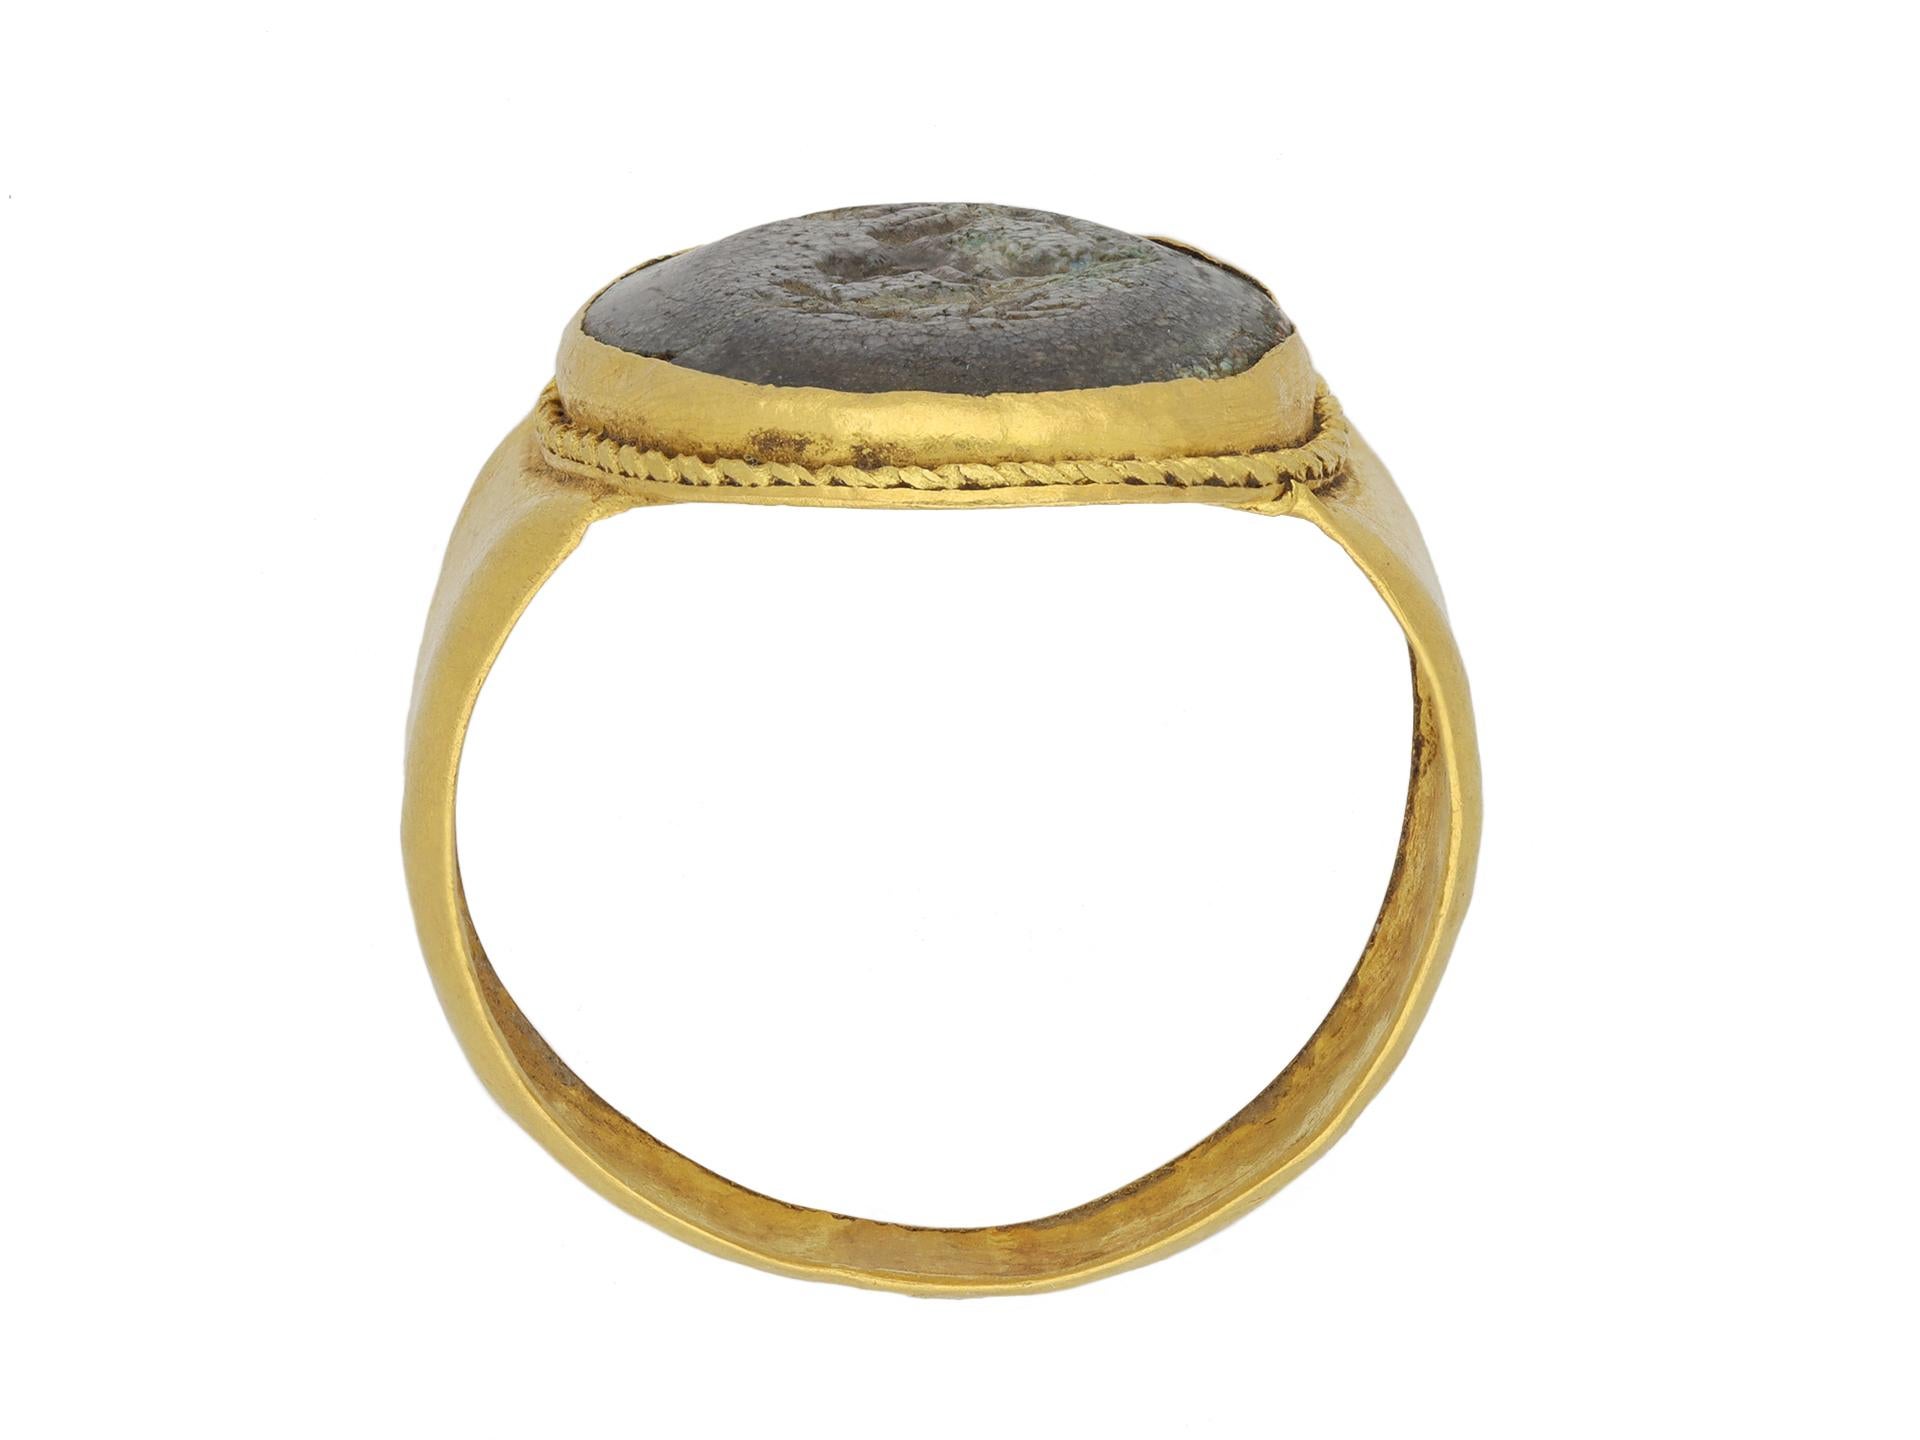 Women's or Men's Ancient Roman signet ring, circa 2nd century AD. For Sale